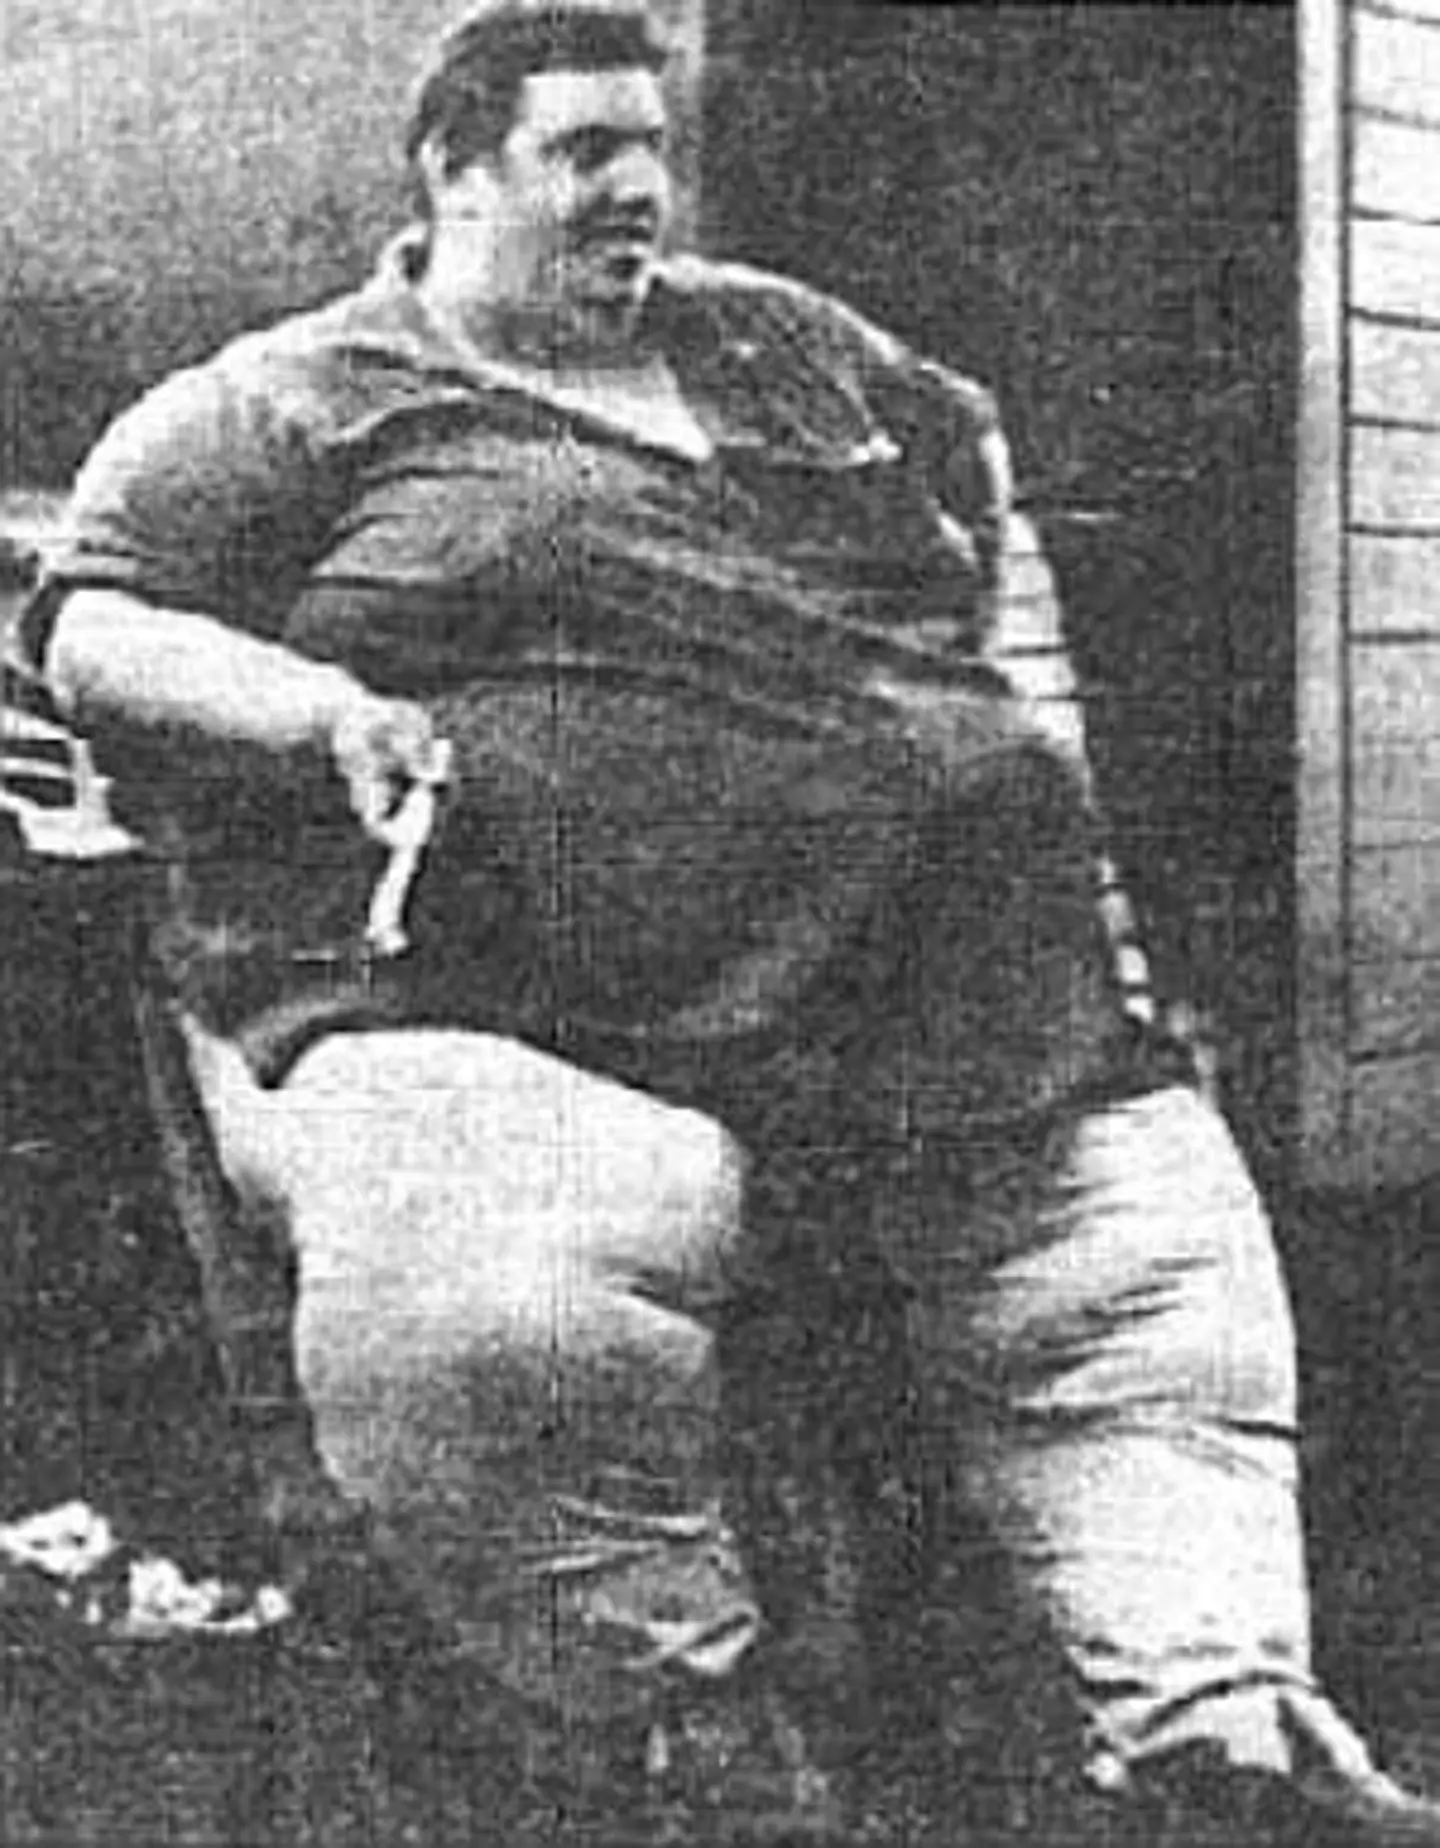 Jon Brower Minnoch weighed 635kg, equal to 1400lbs.